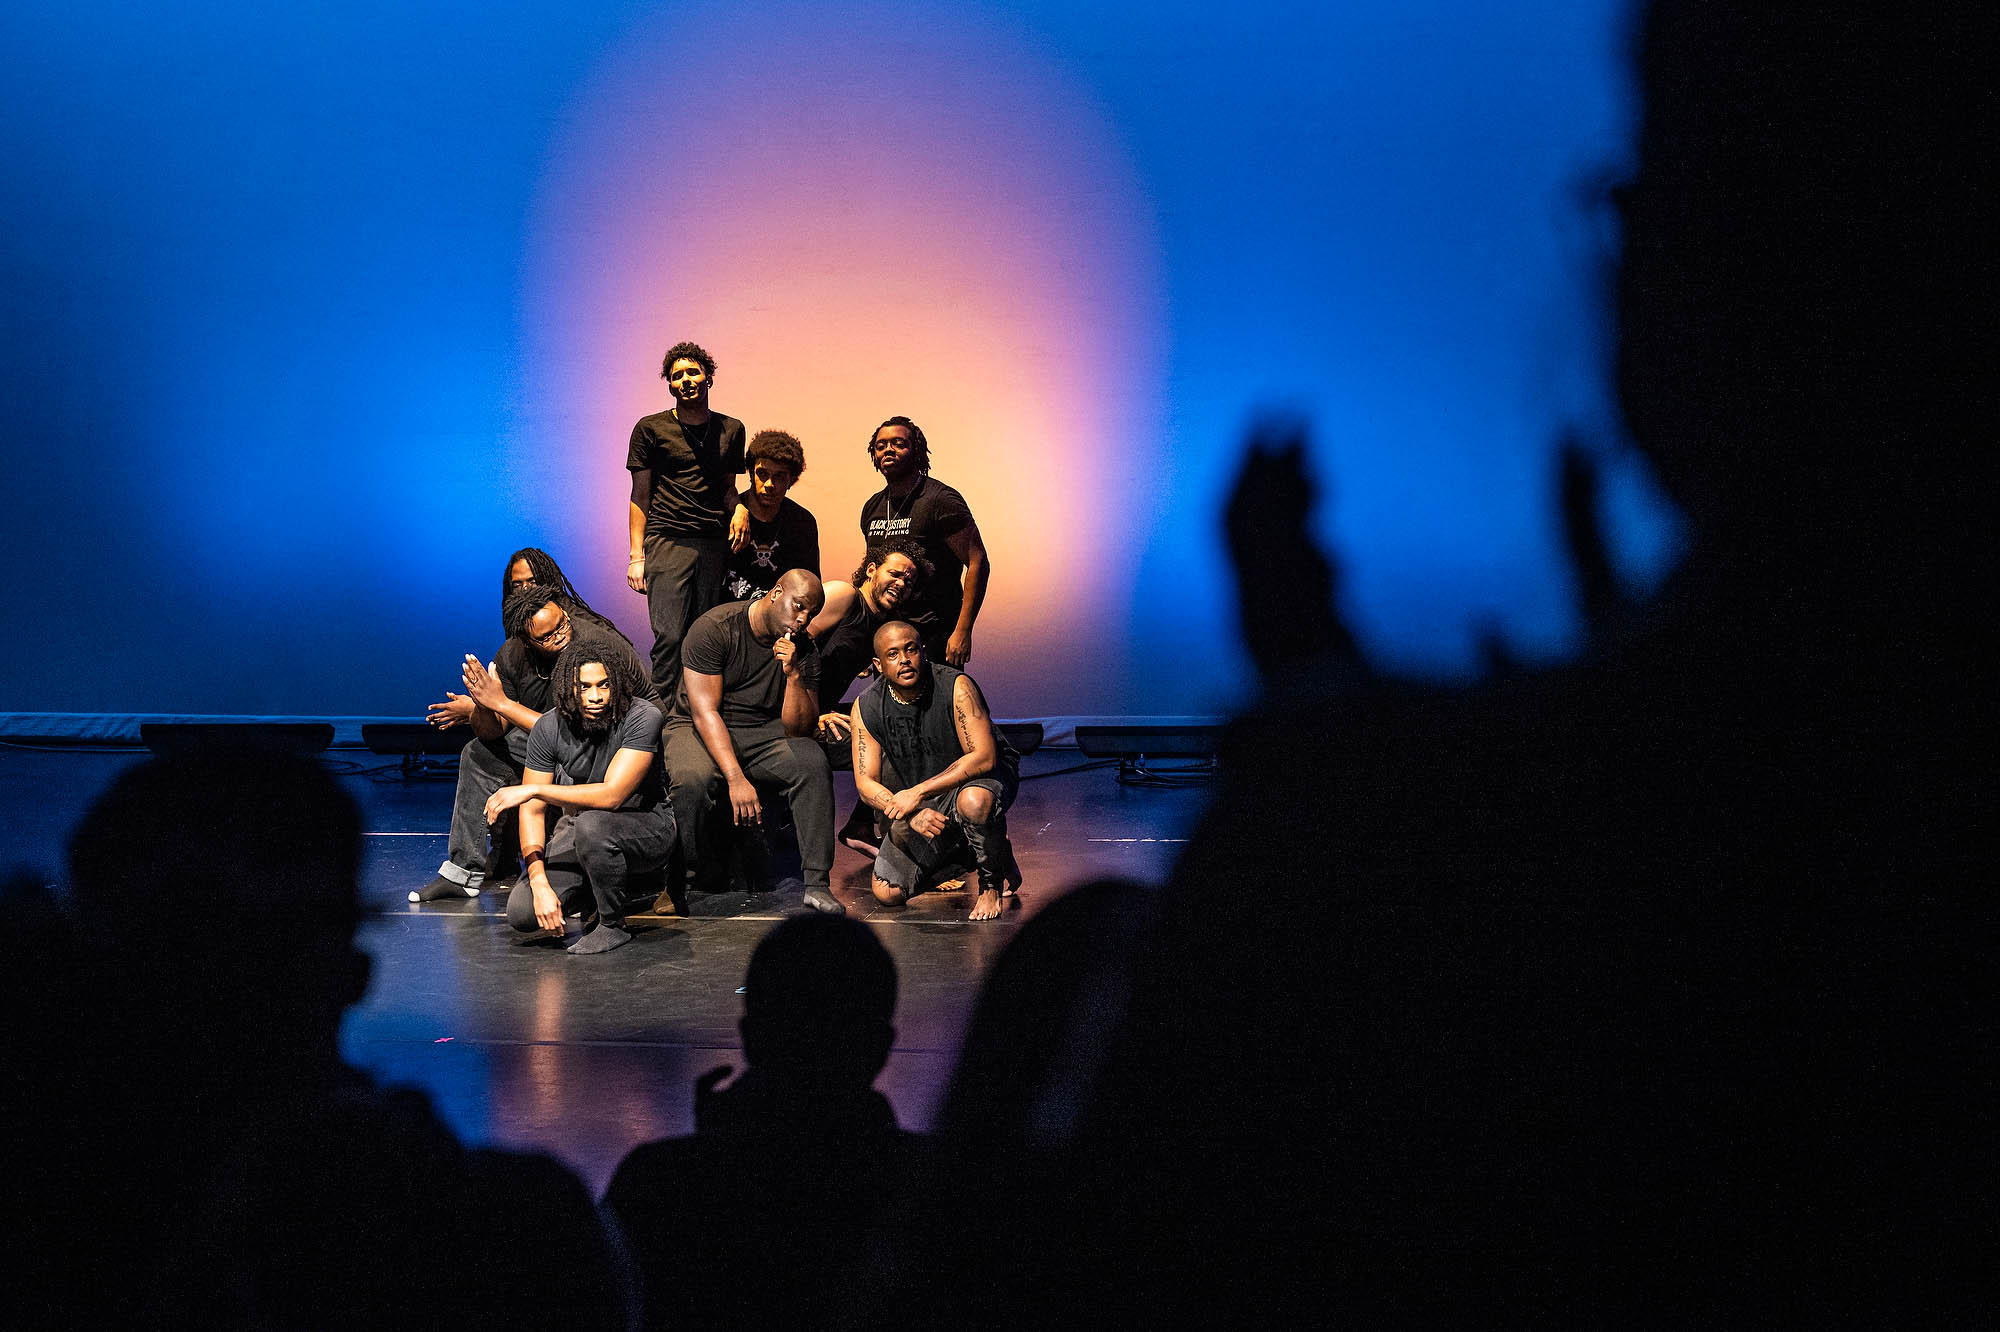 A group of performers in black pose in a group while recieving a standing ovation from an audience.